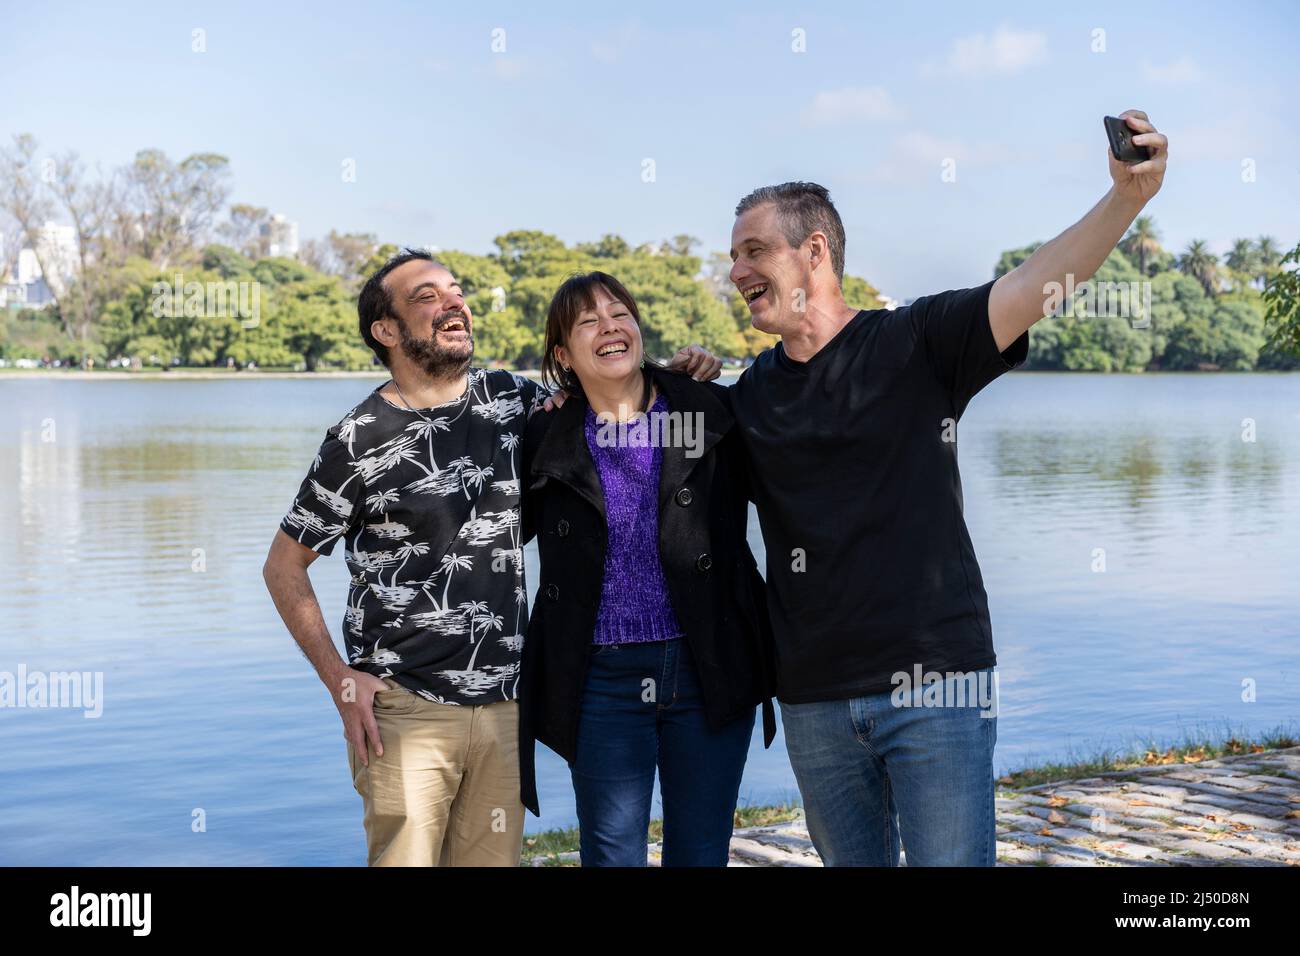 Group of friends of different ages taking a selfie in a lake. Happy expressions. Copy space Stock Photo